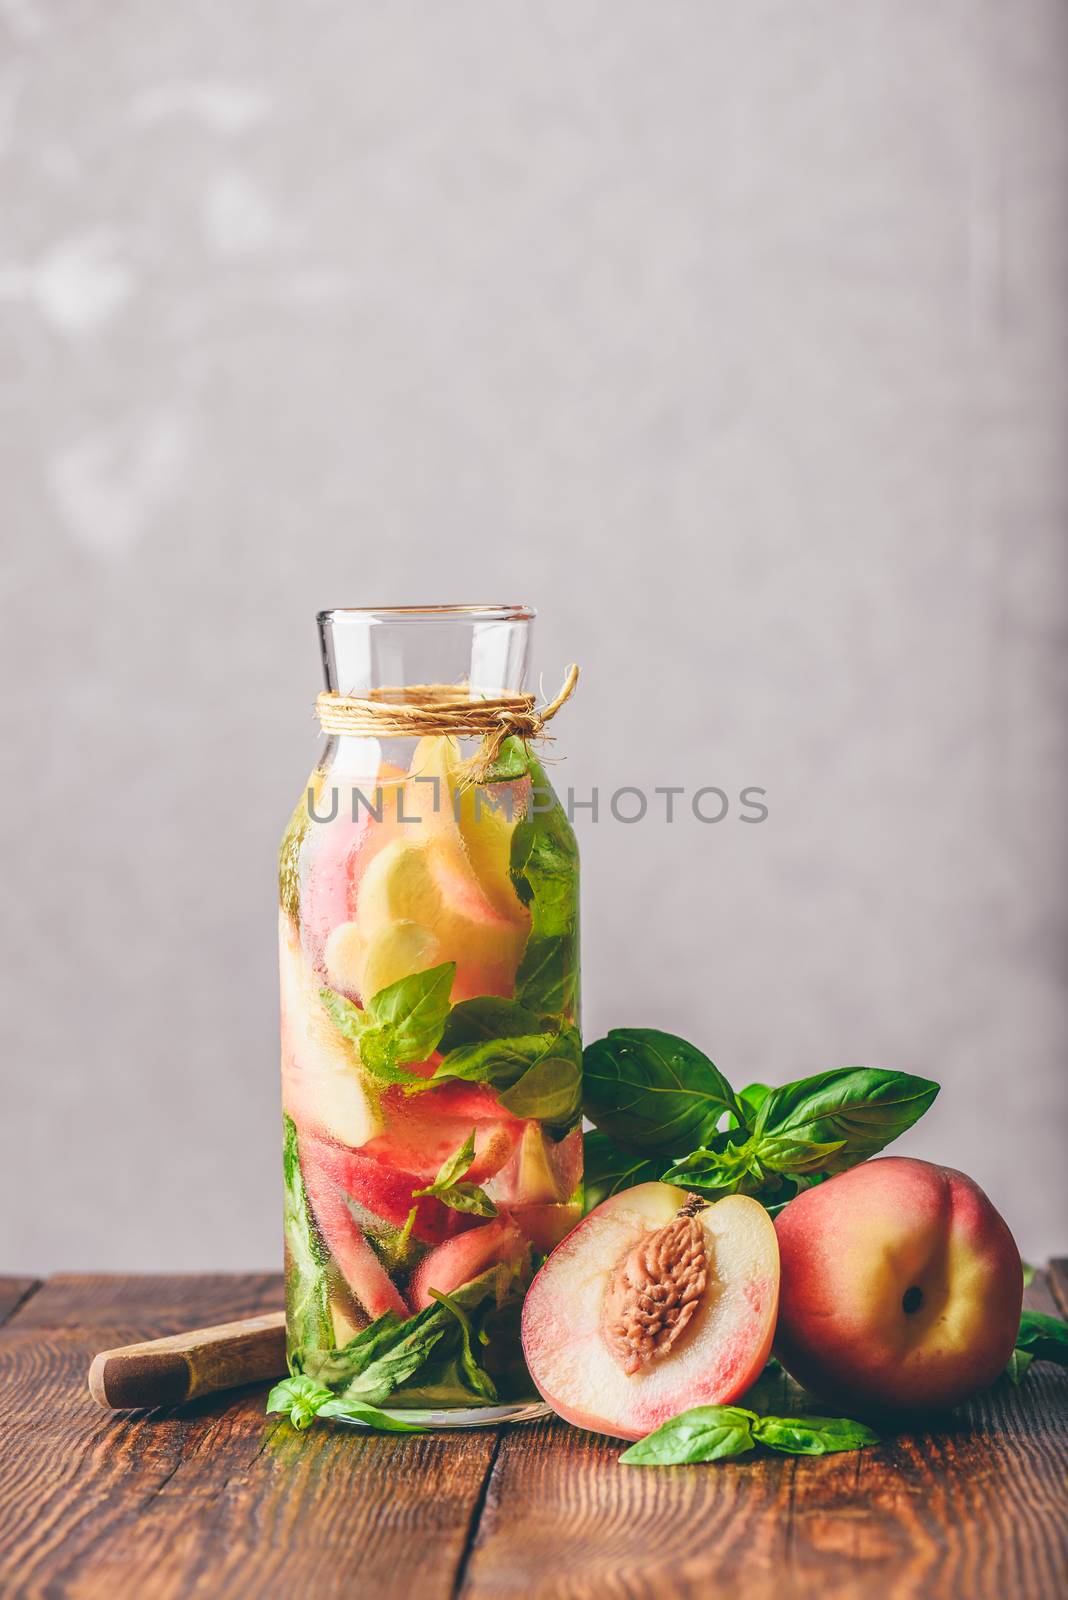 Bottle of Detox Water with Sliced Peach and Basil Leaves. Knife and Ingredients on Wooden Table. Vertical Orientation.